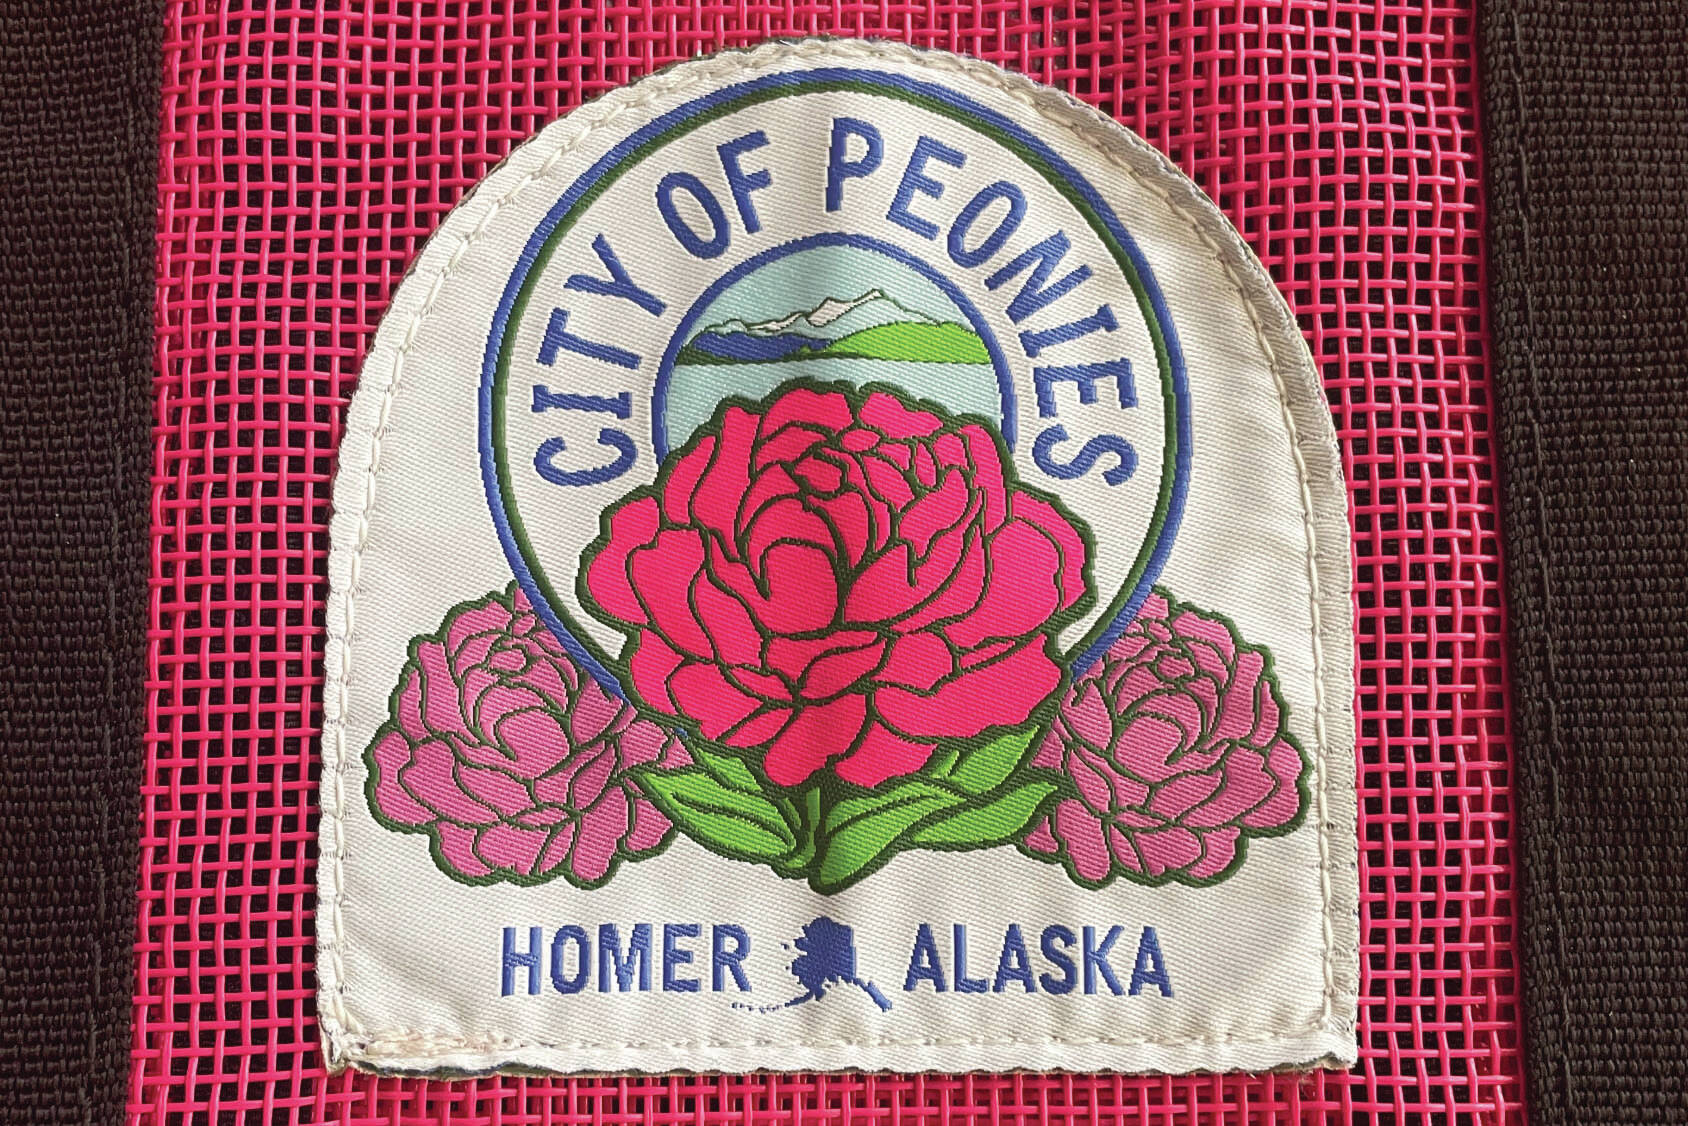 Photo by Emilie Springer/Homer News
Homer’s official peony patch is attached to a Nomar tote bag, available for purchase at the Homer Chamber of Commerce, during the month of July.